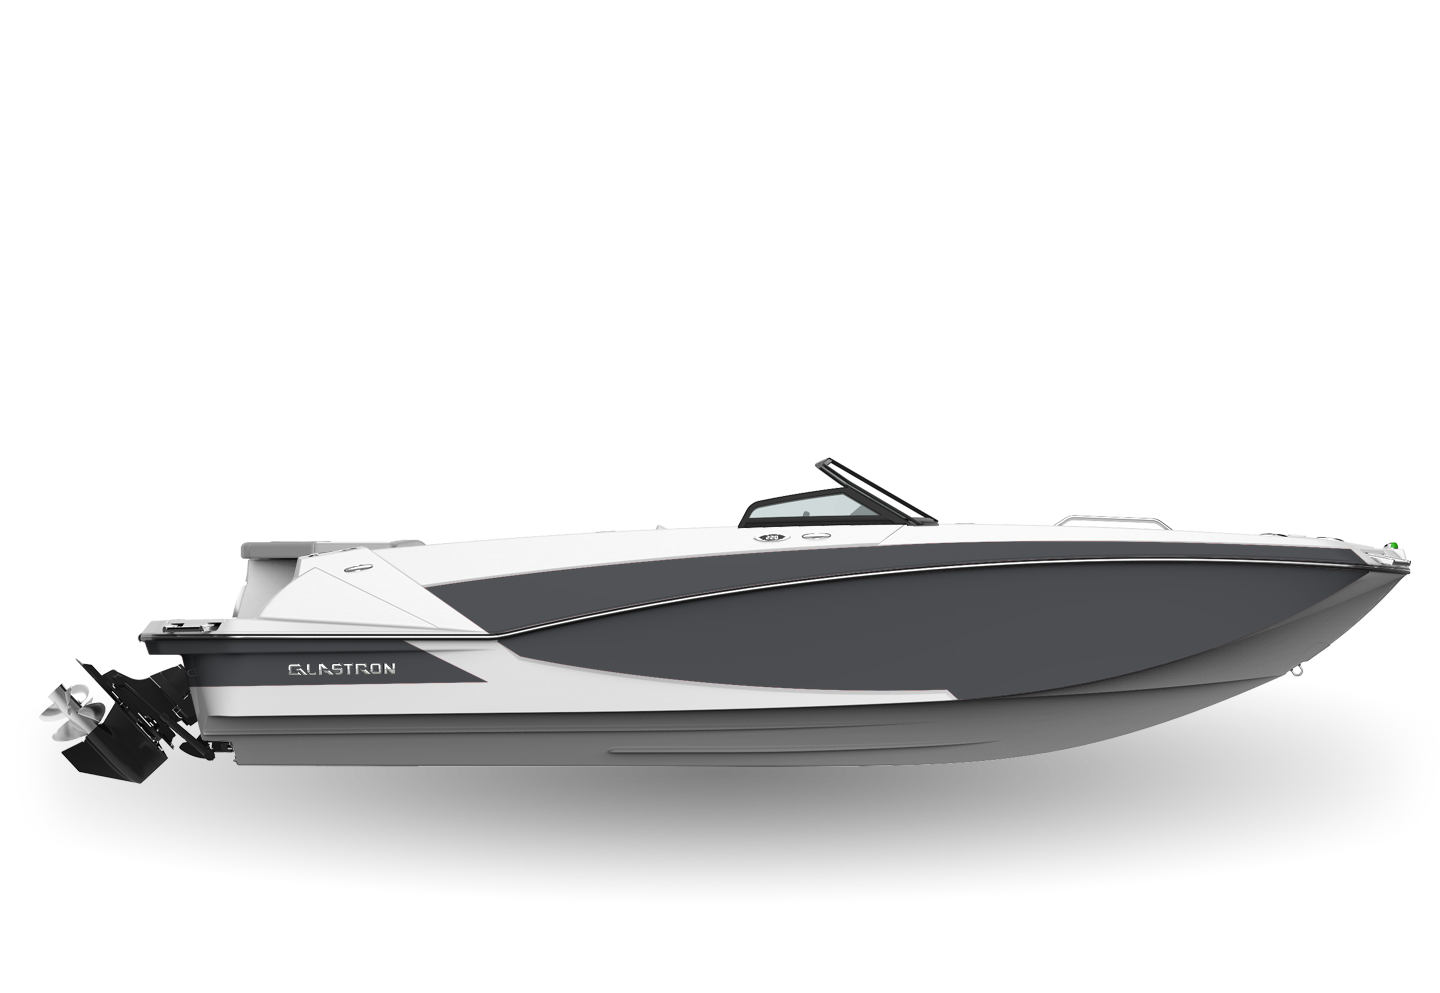 Pick the Engine You Want Your 2019 Glastron® Boat To Have